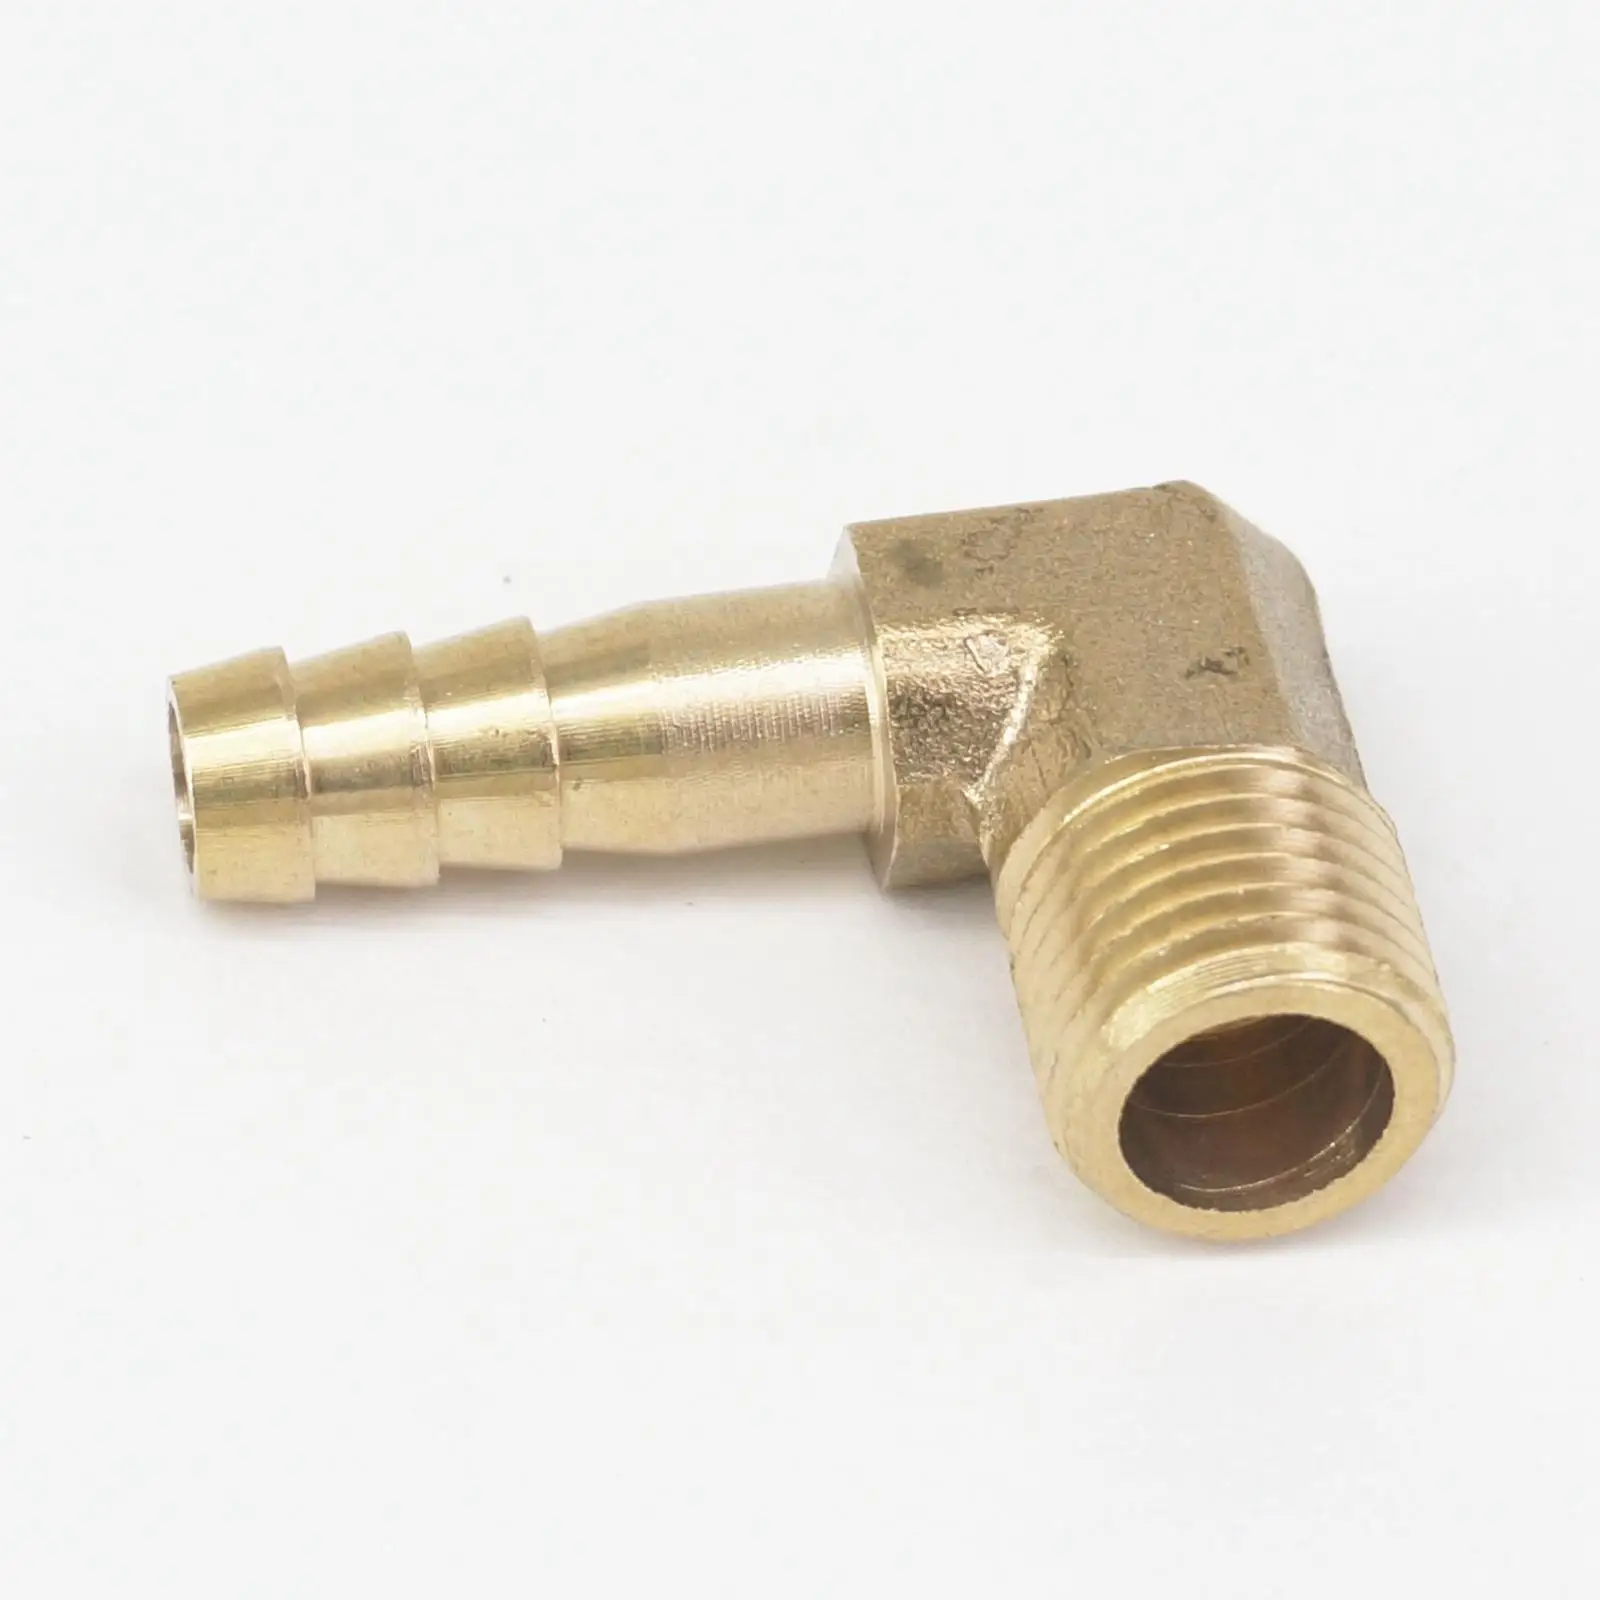 

LOT 2 Hose Barb I/D 8mm x 1/4" BSP Male Thread Elbow Brass coupler Splicer Connector fitting for Fuel Gas Water